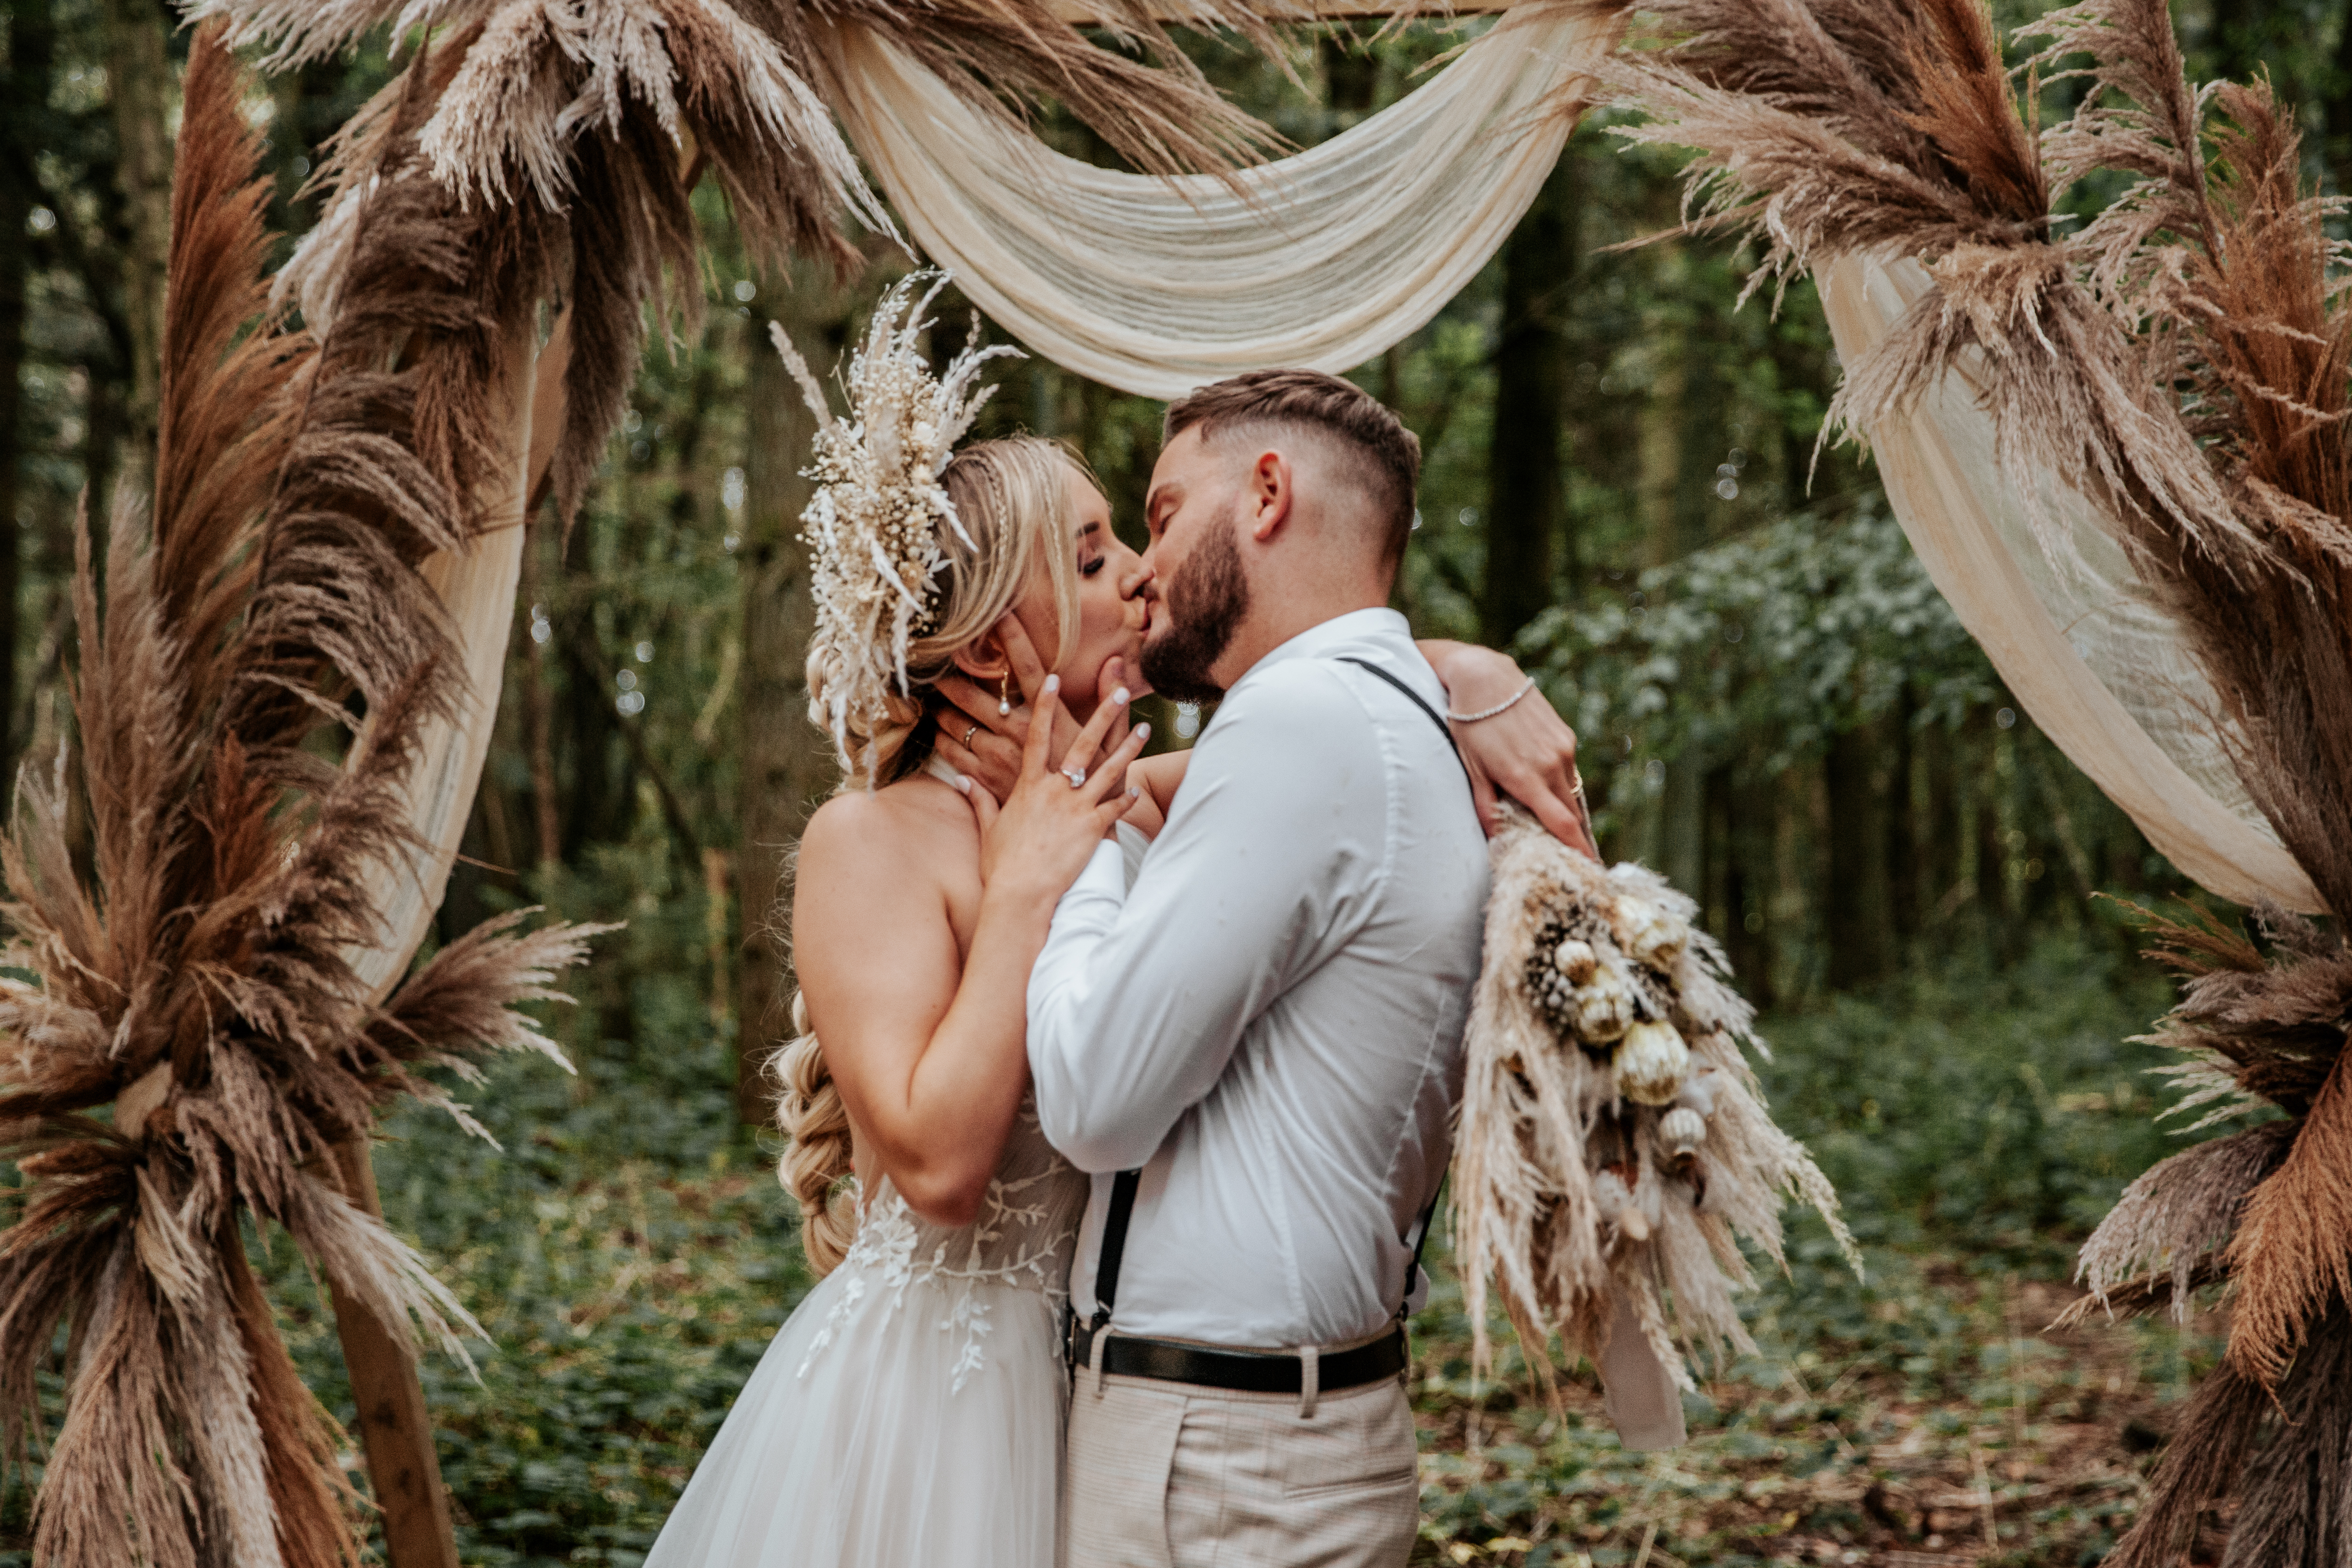 Will and Jess kiss in boho wedding outfits infront of Longton Wood's wooden archway